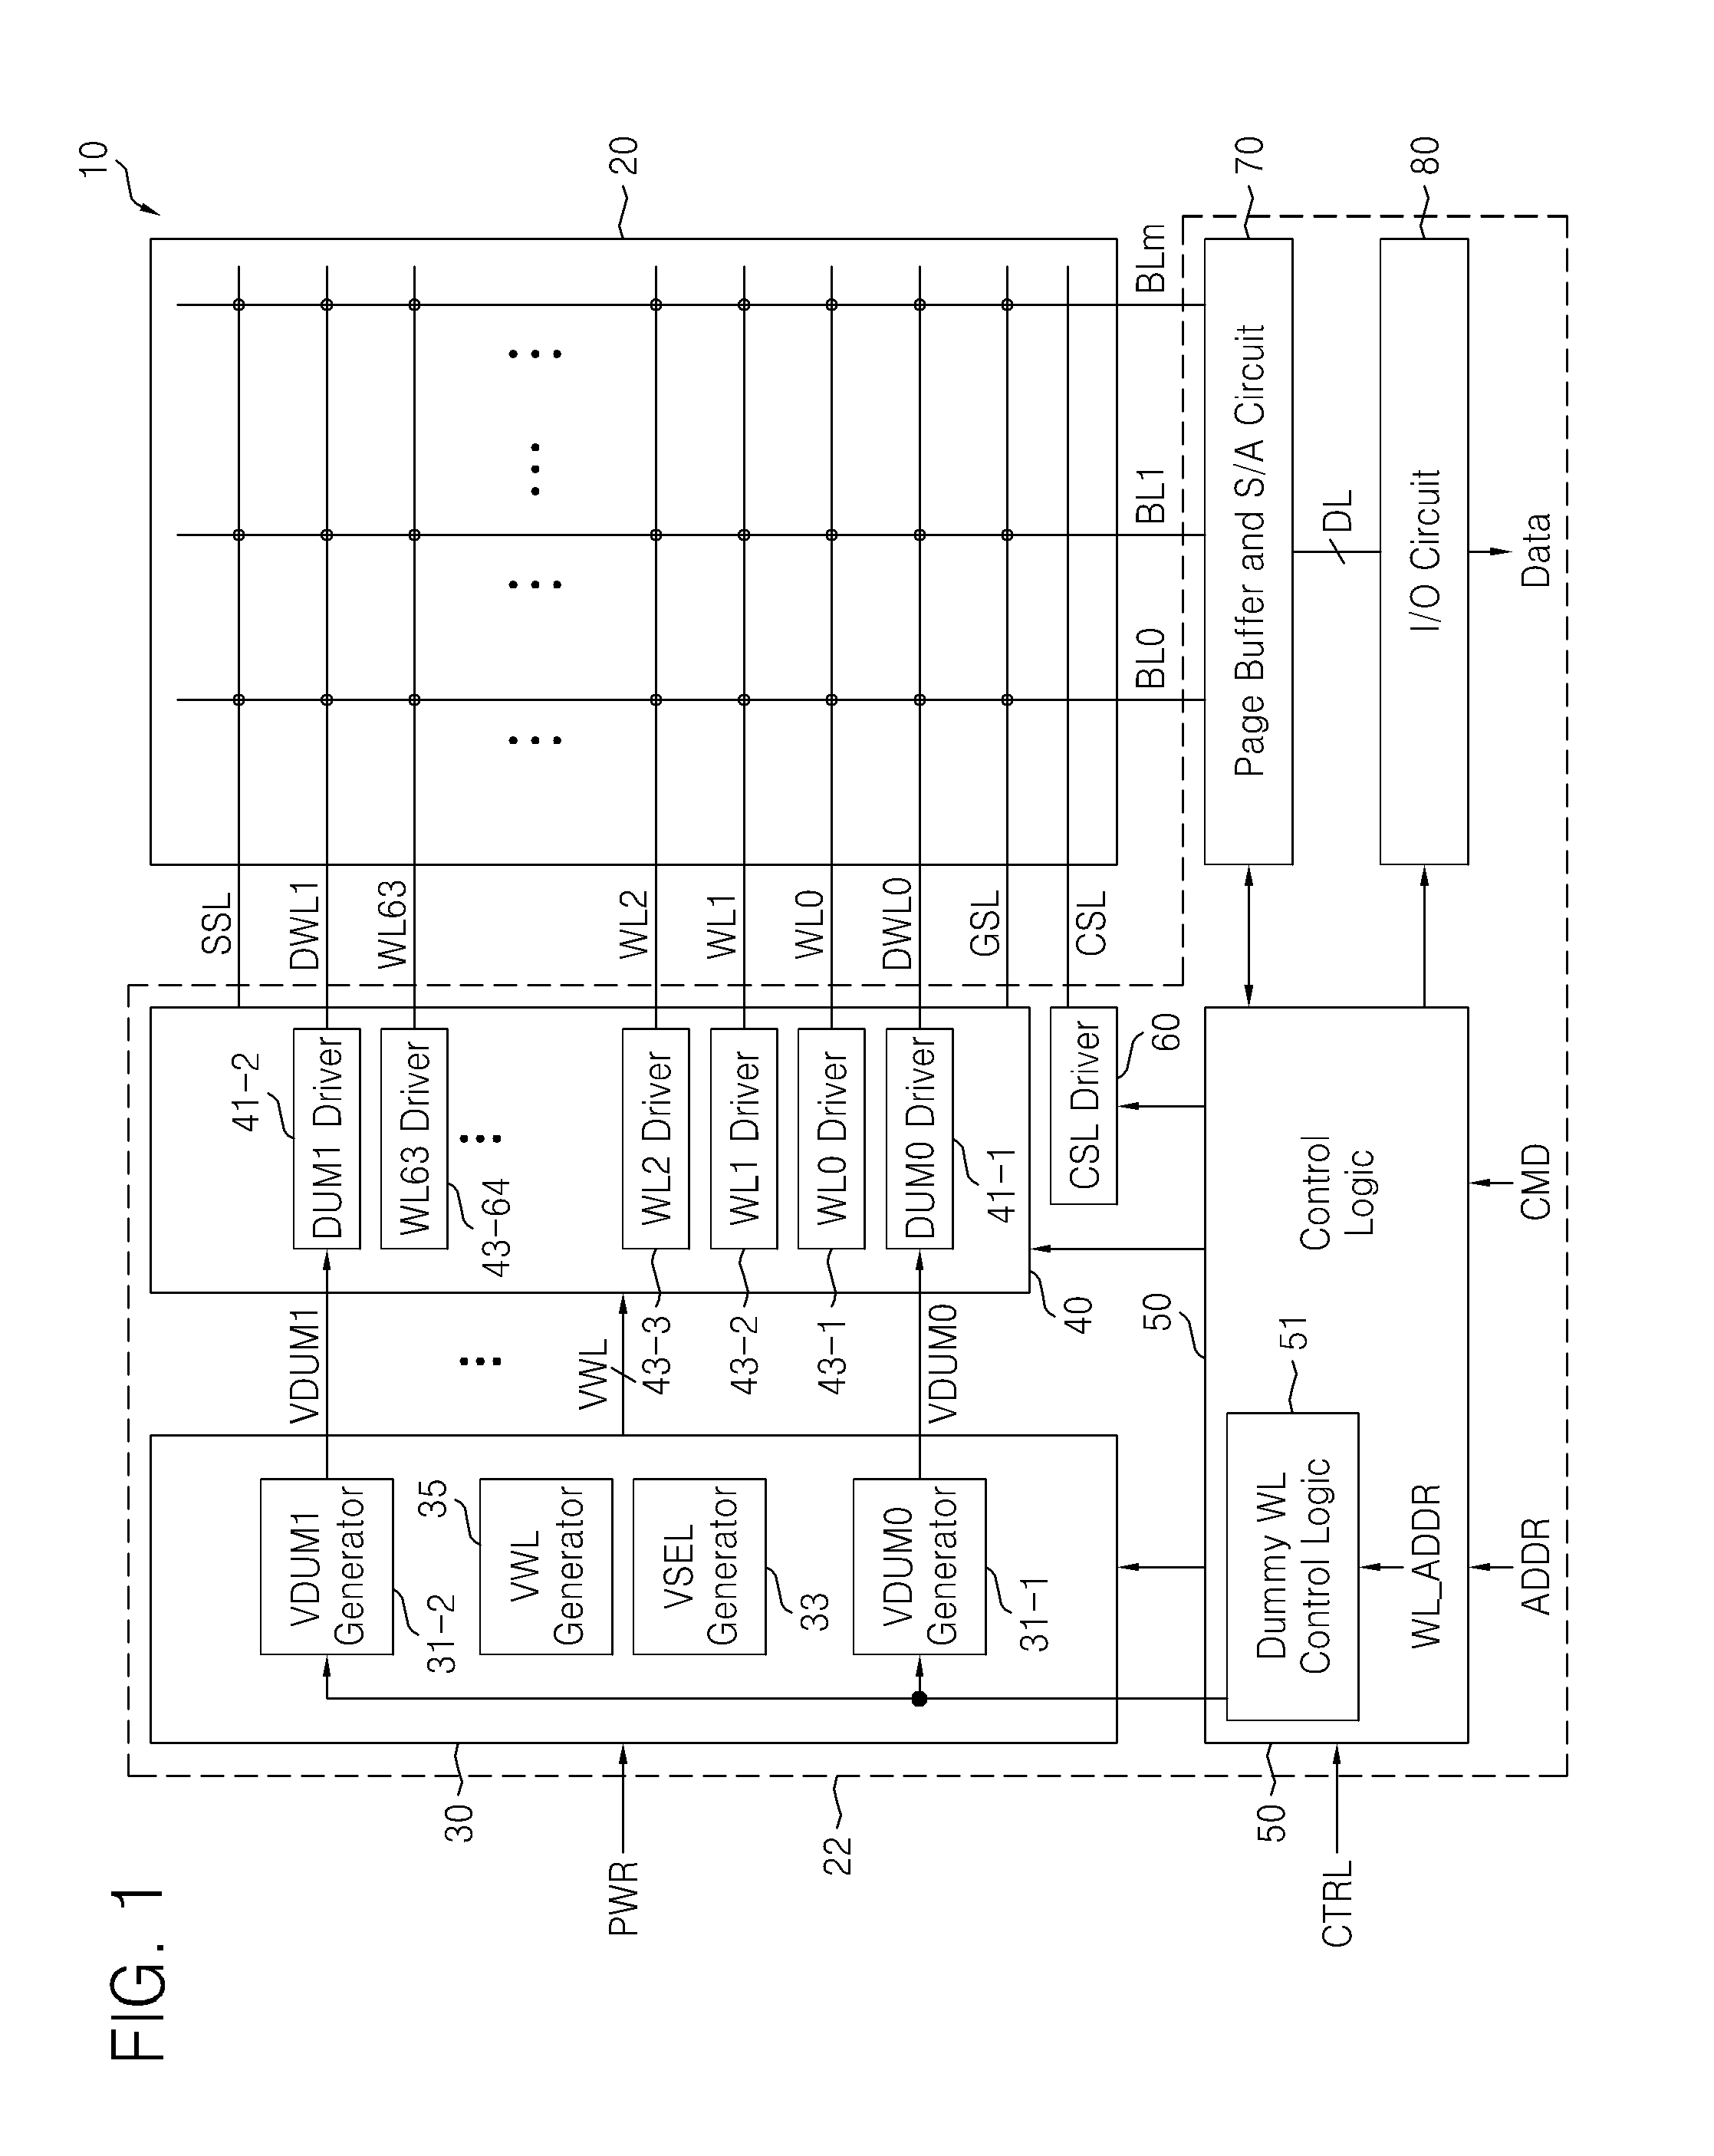 Non-volatile memory device and method controlling dummy word line voltage according to location of selected word line